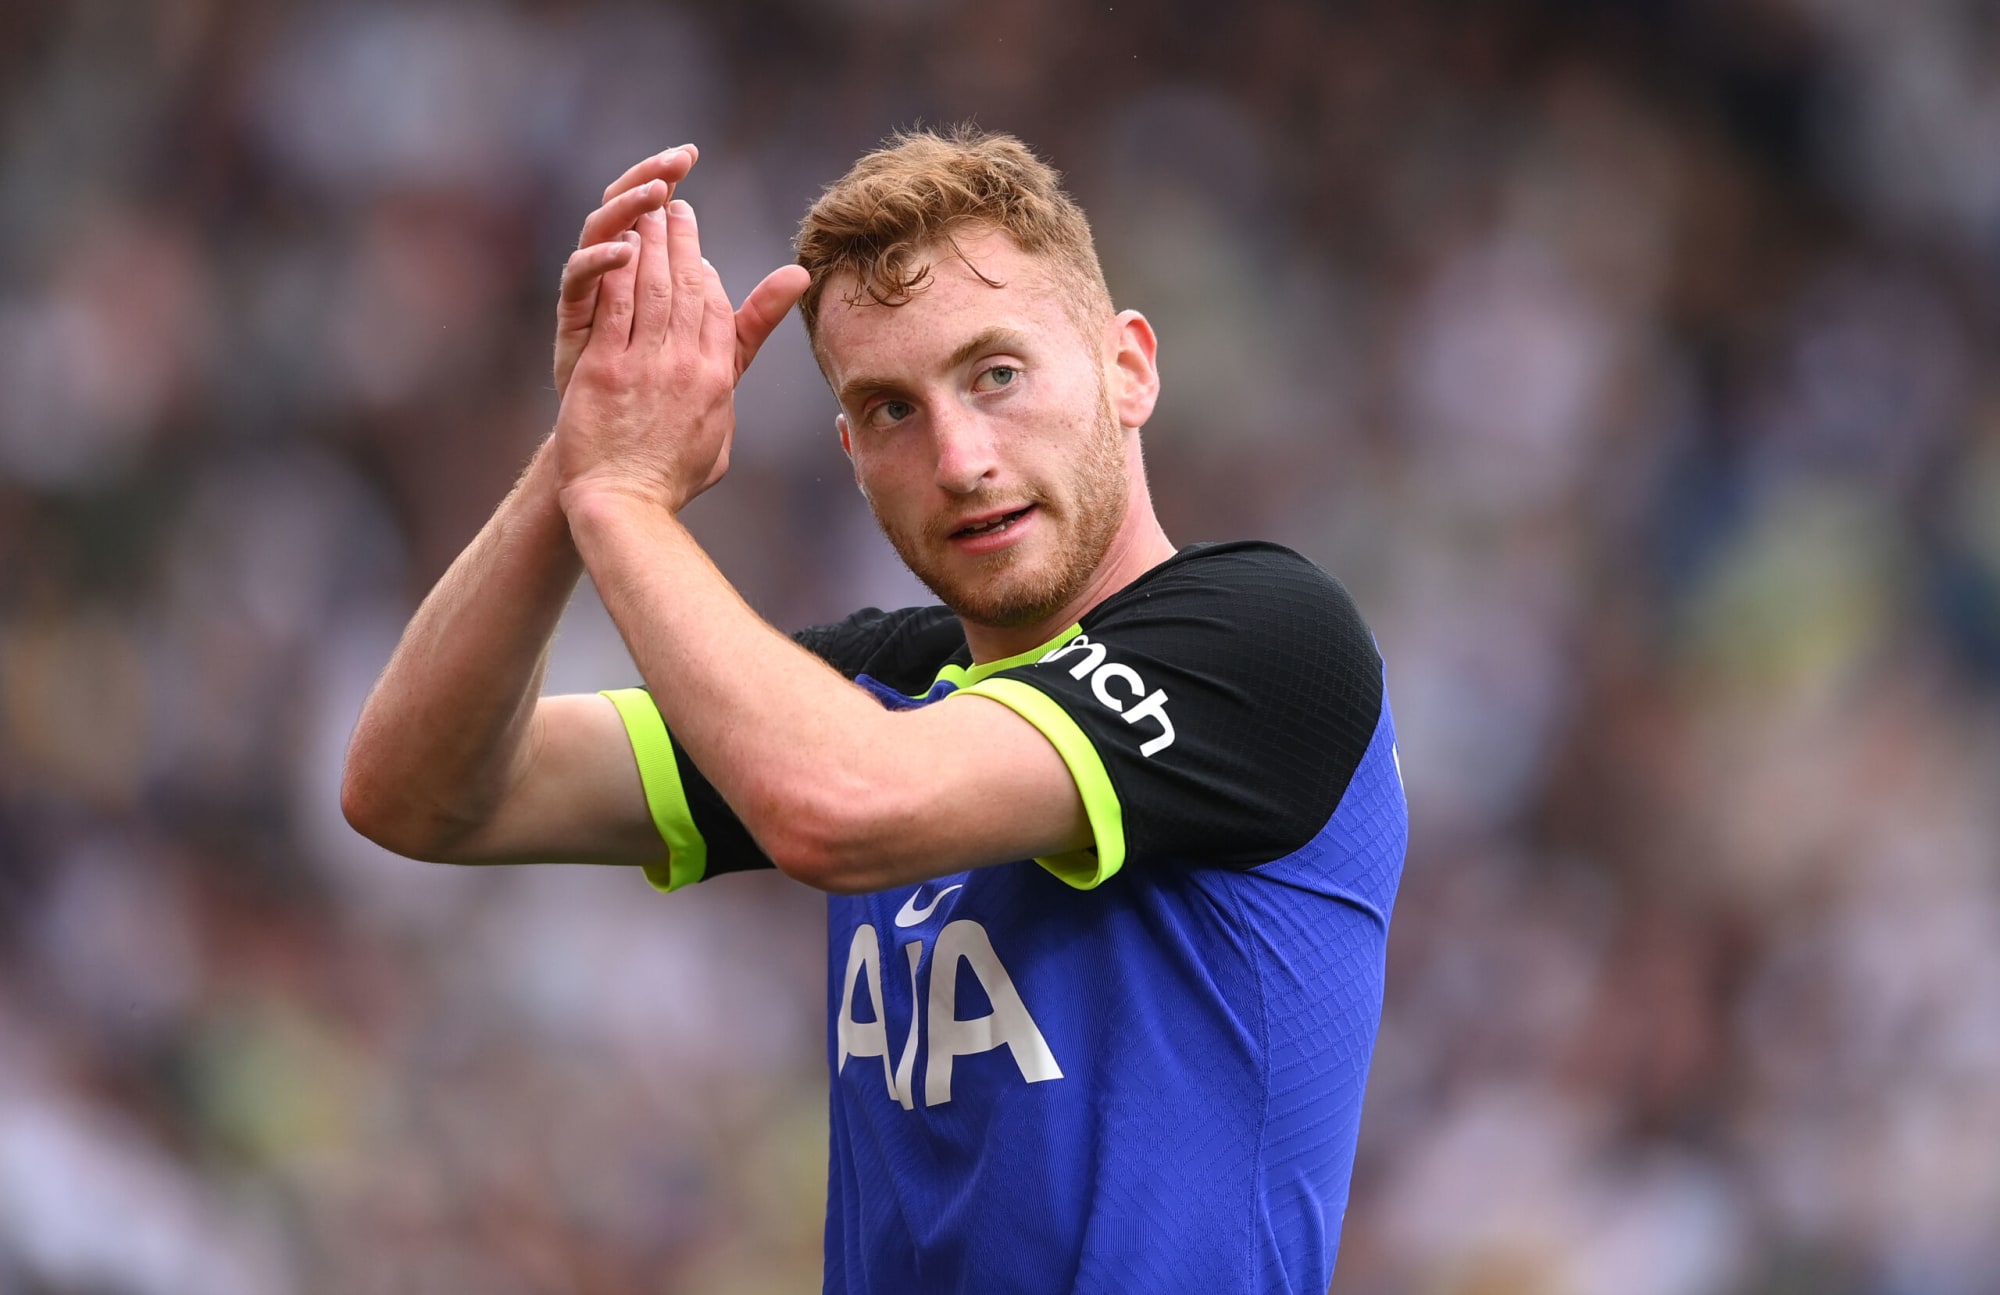 Tottenham intent on keeping influential loanee at club permanently